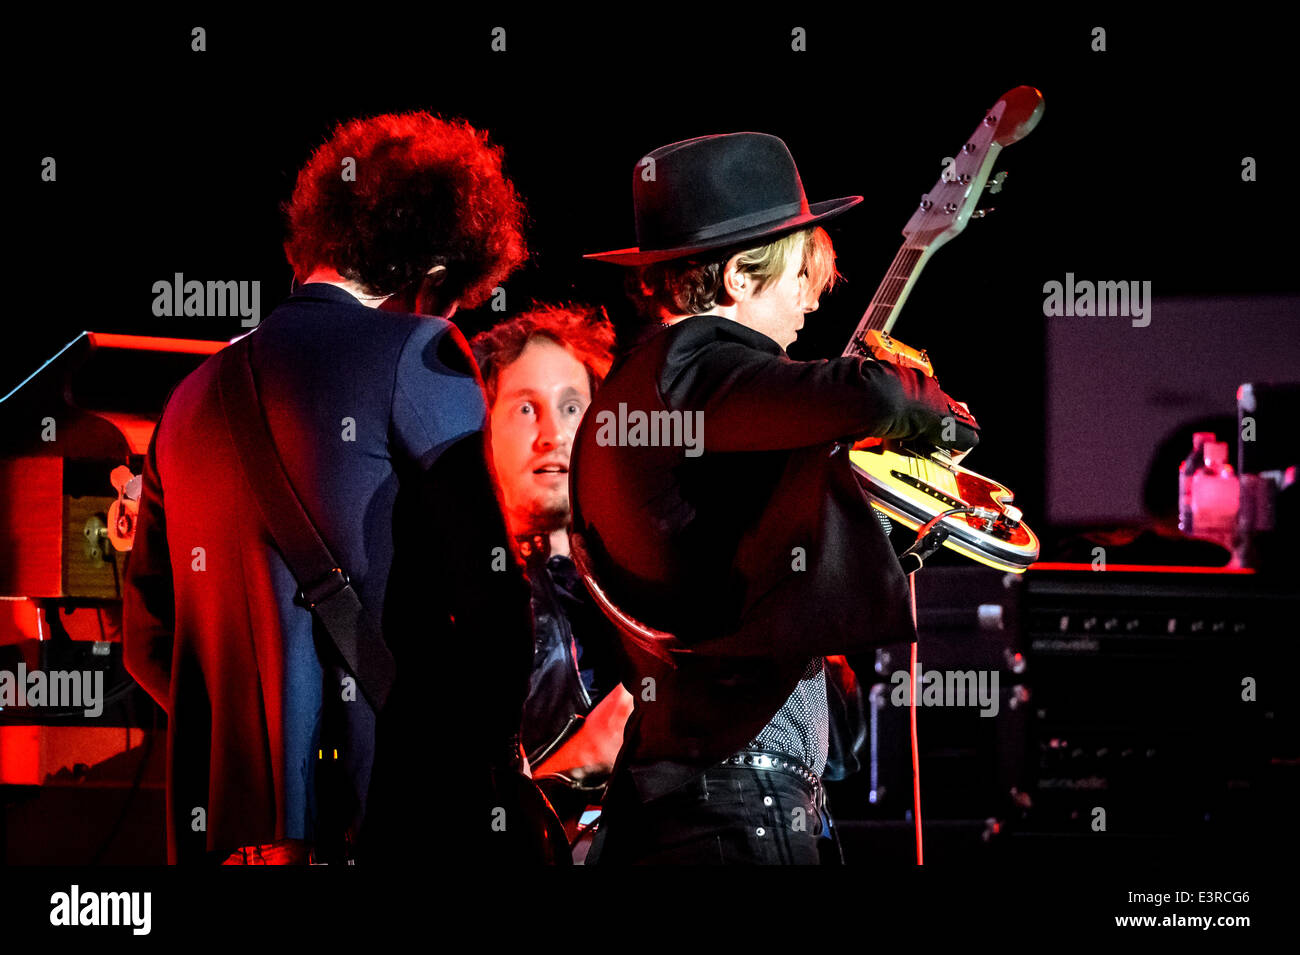 Toronto, Ontario, Canada. 27th June, 2014. American musician, singer-songwriter and multi-instrumentalist BECK HANSEN known as 'BECK' perfroms at Sony Centre in Toronto. Credit:  Igor Vidyashev/ZUMAPRESS.com/Alamy Live News Stock Photo